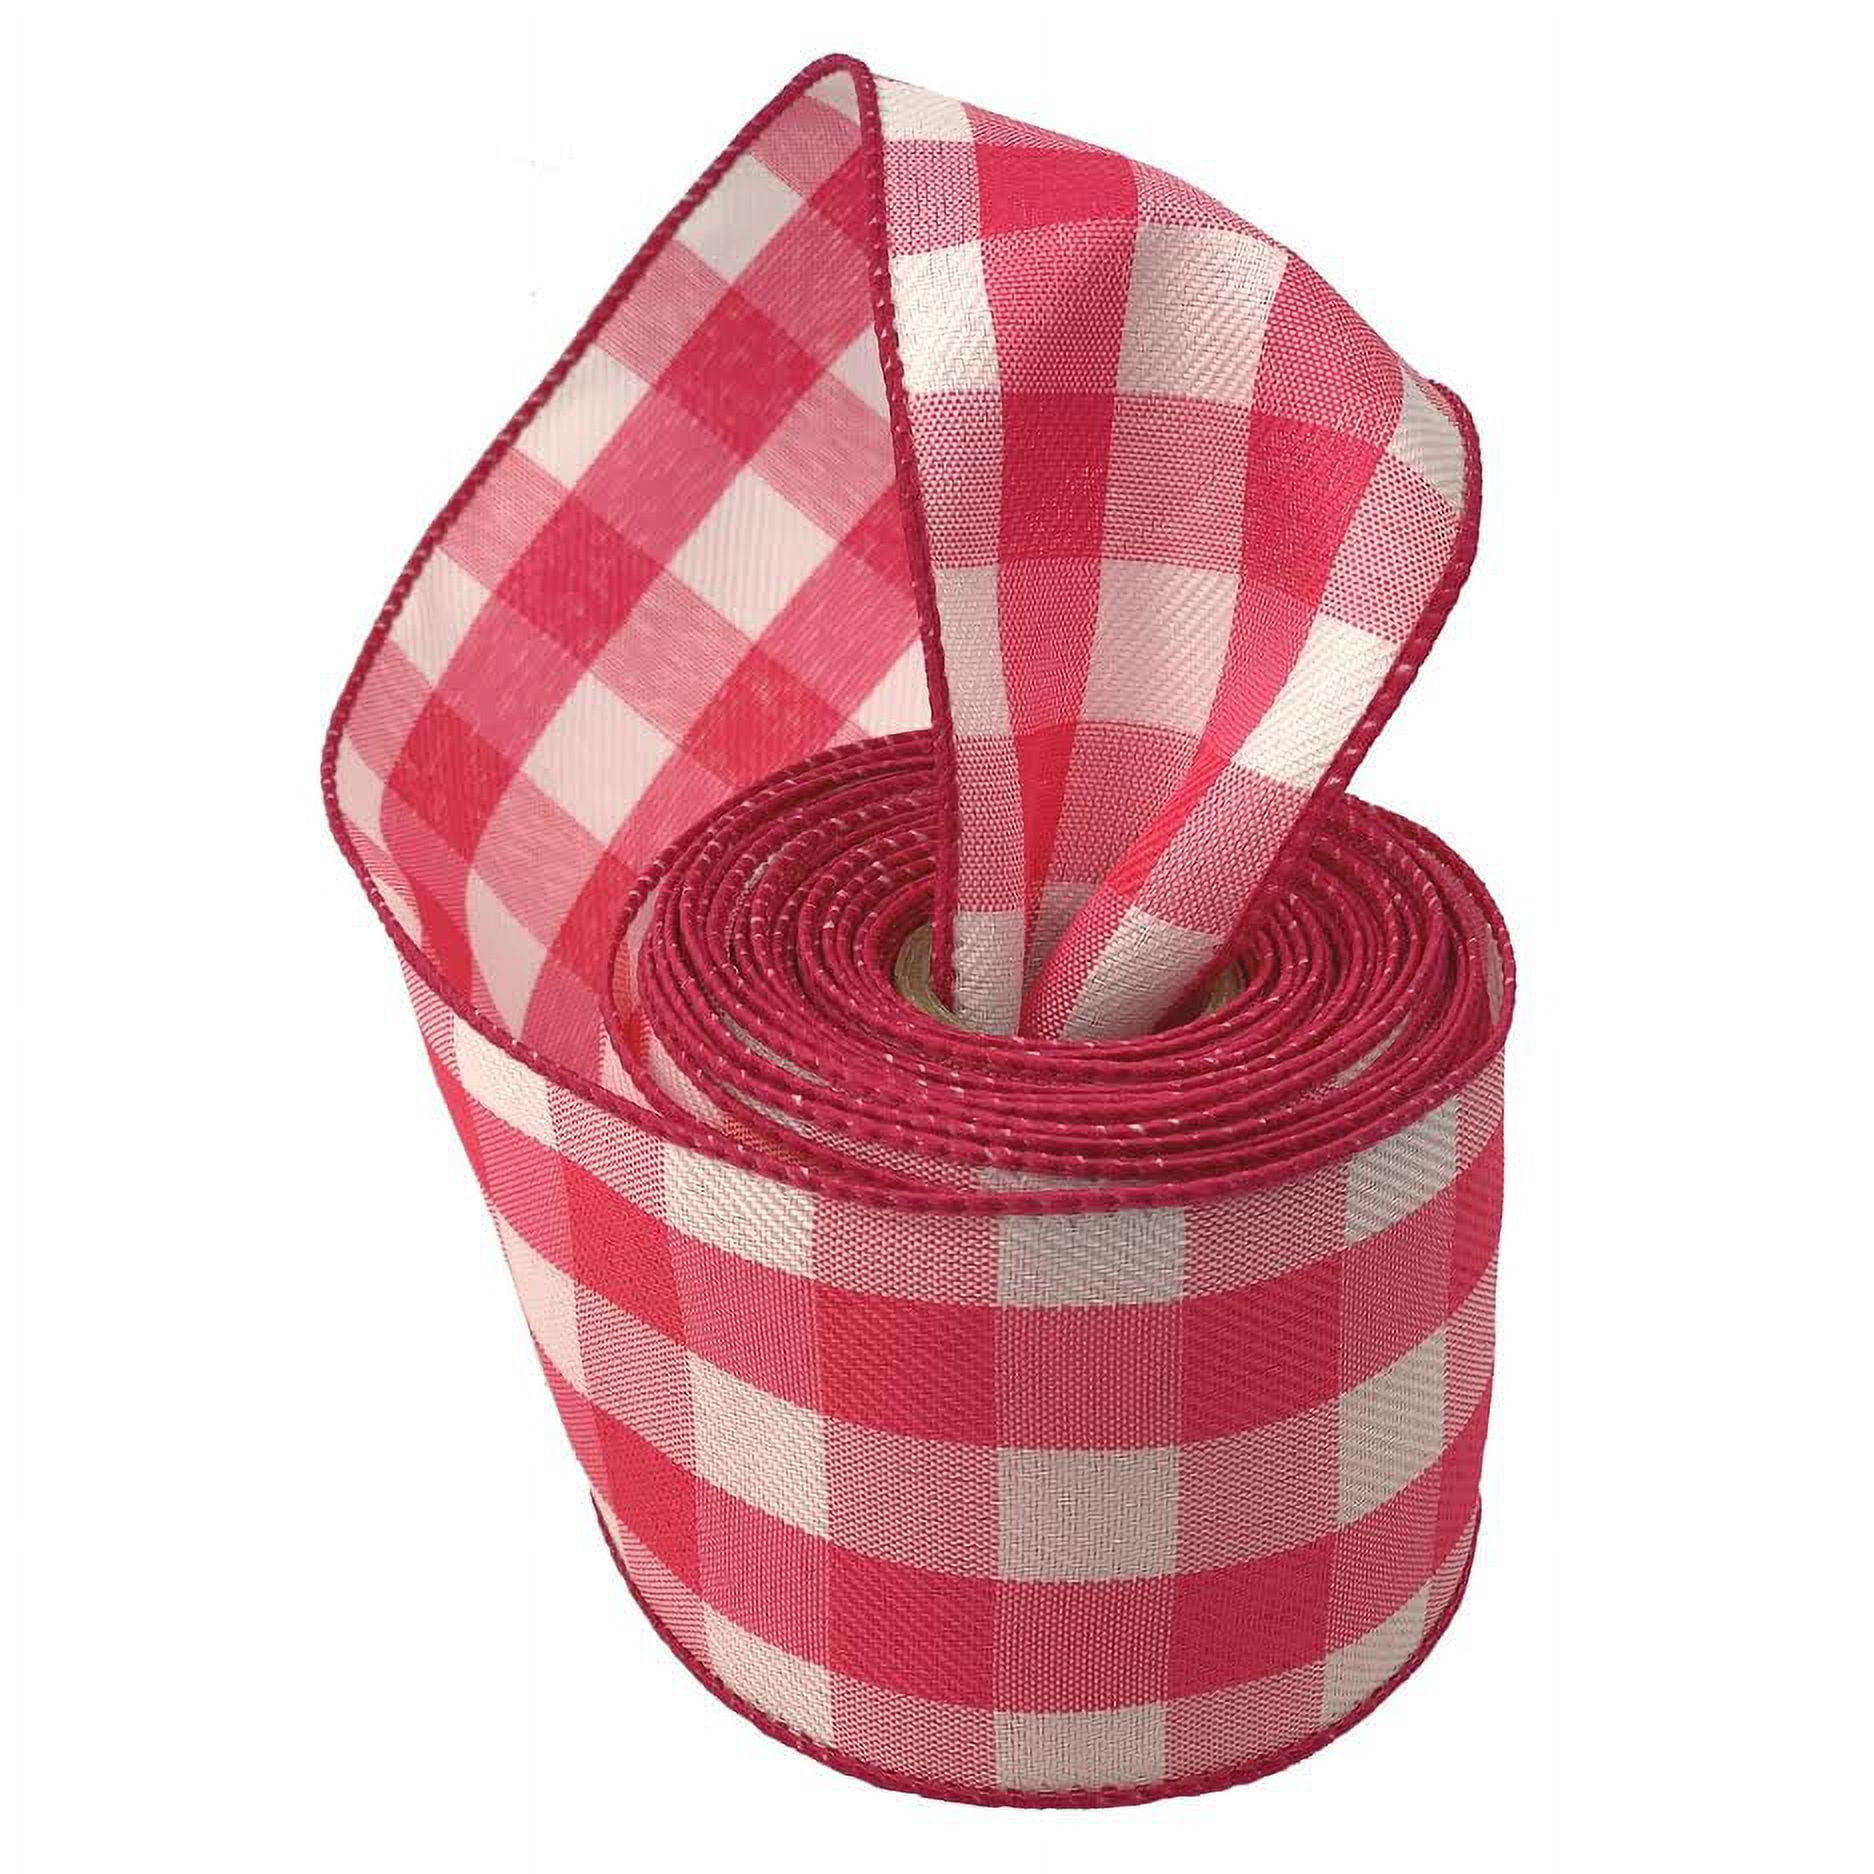 Red Gingham Wired Edge Ribbon - 1 1/2, Hobby Lobby